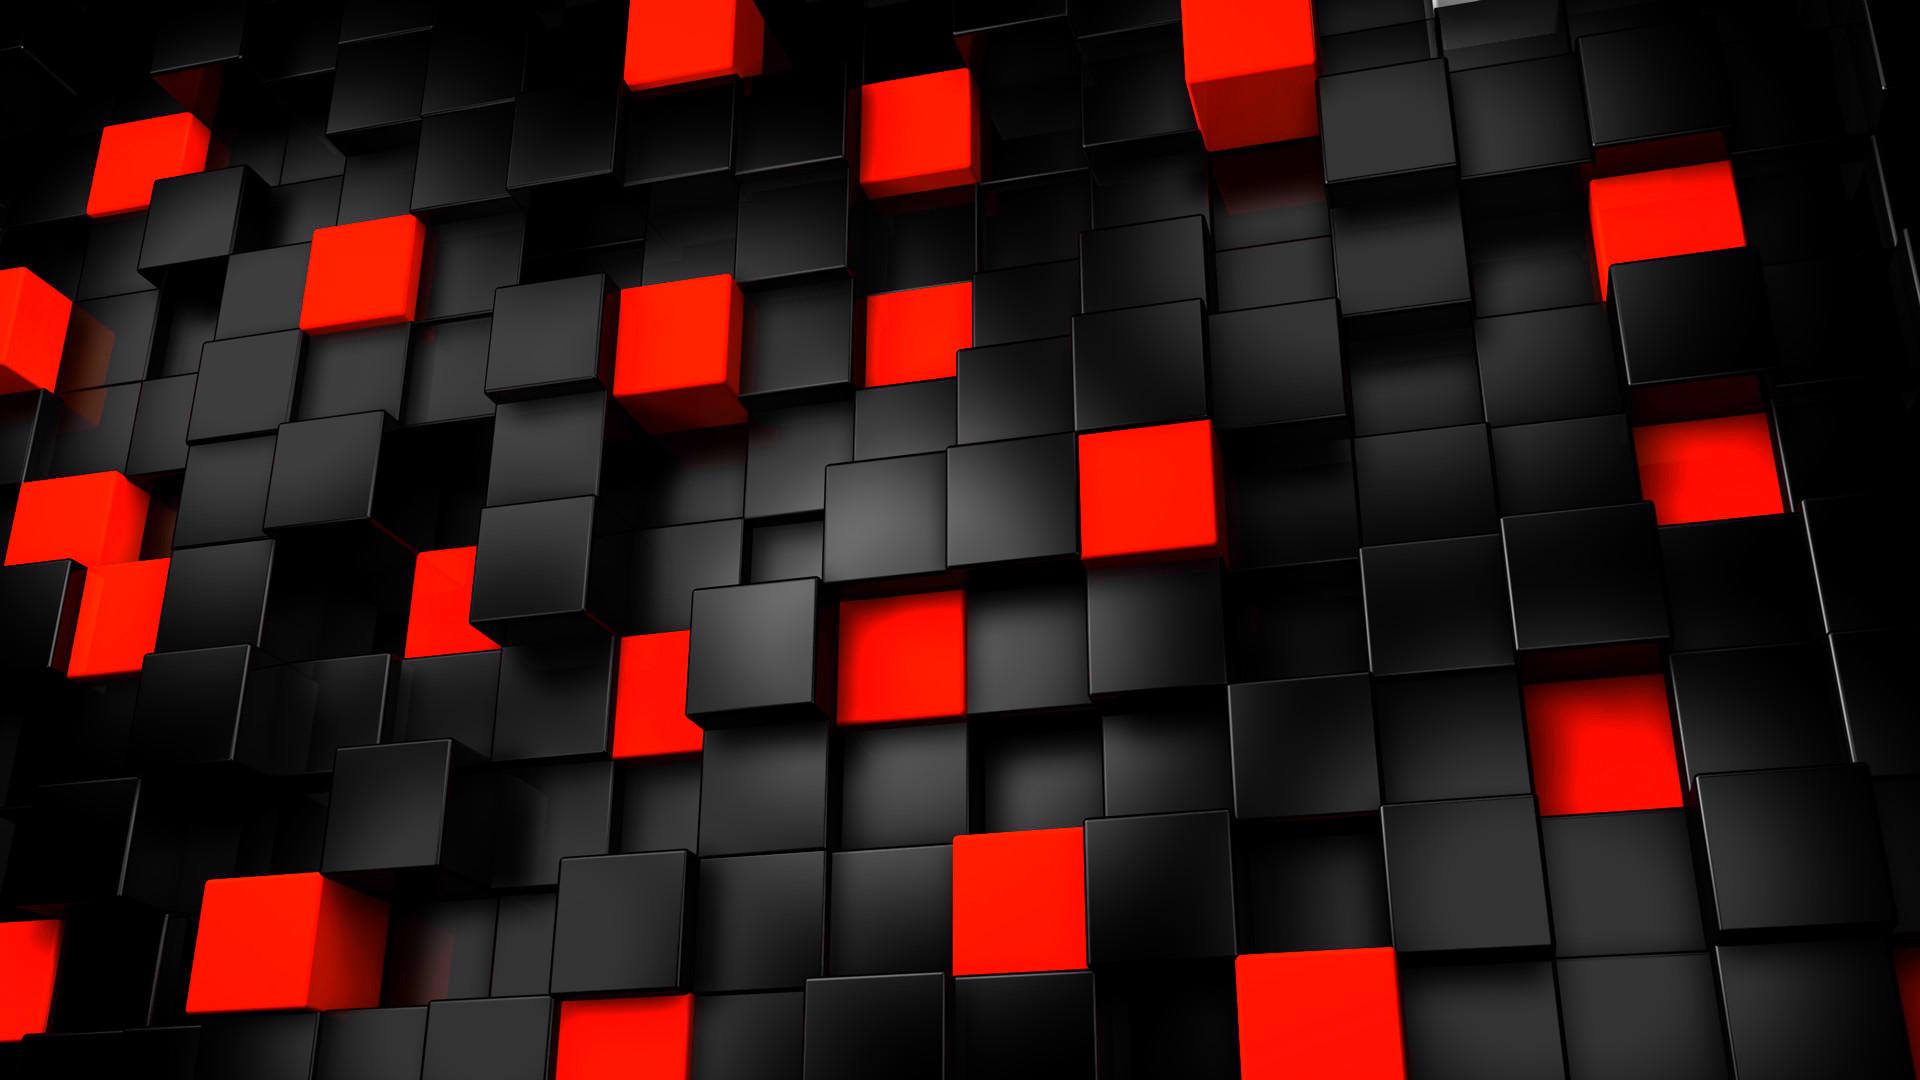 Black and Red Wallpaper HD download